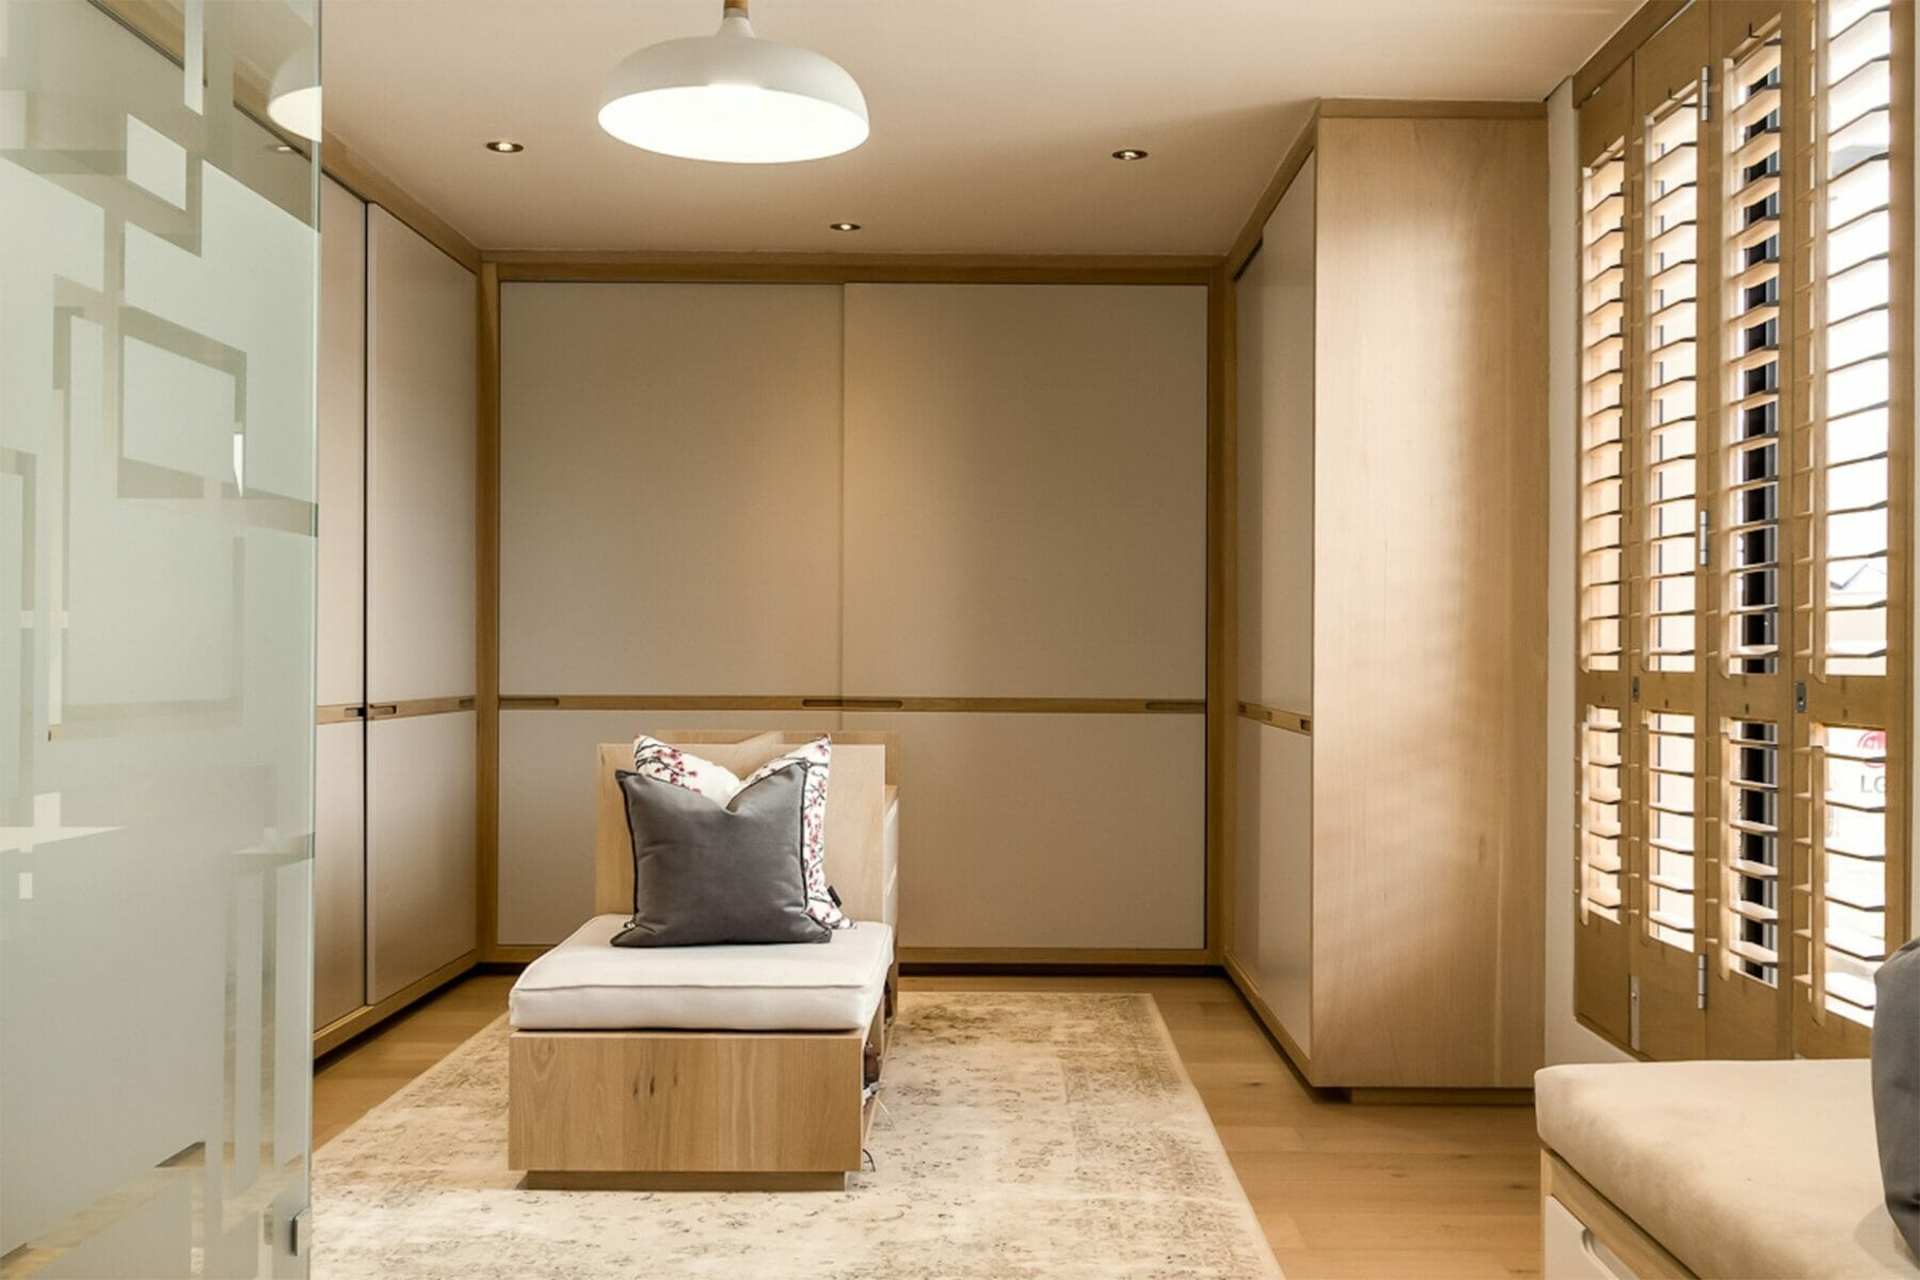 Luxury Interiors South Africa - The Excellence Group wardrobes